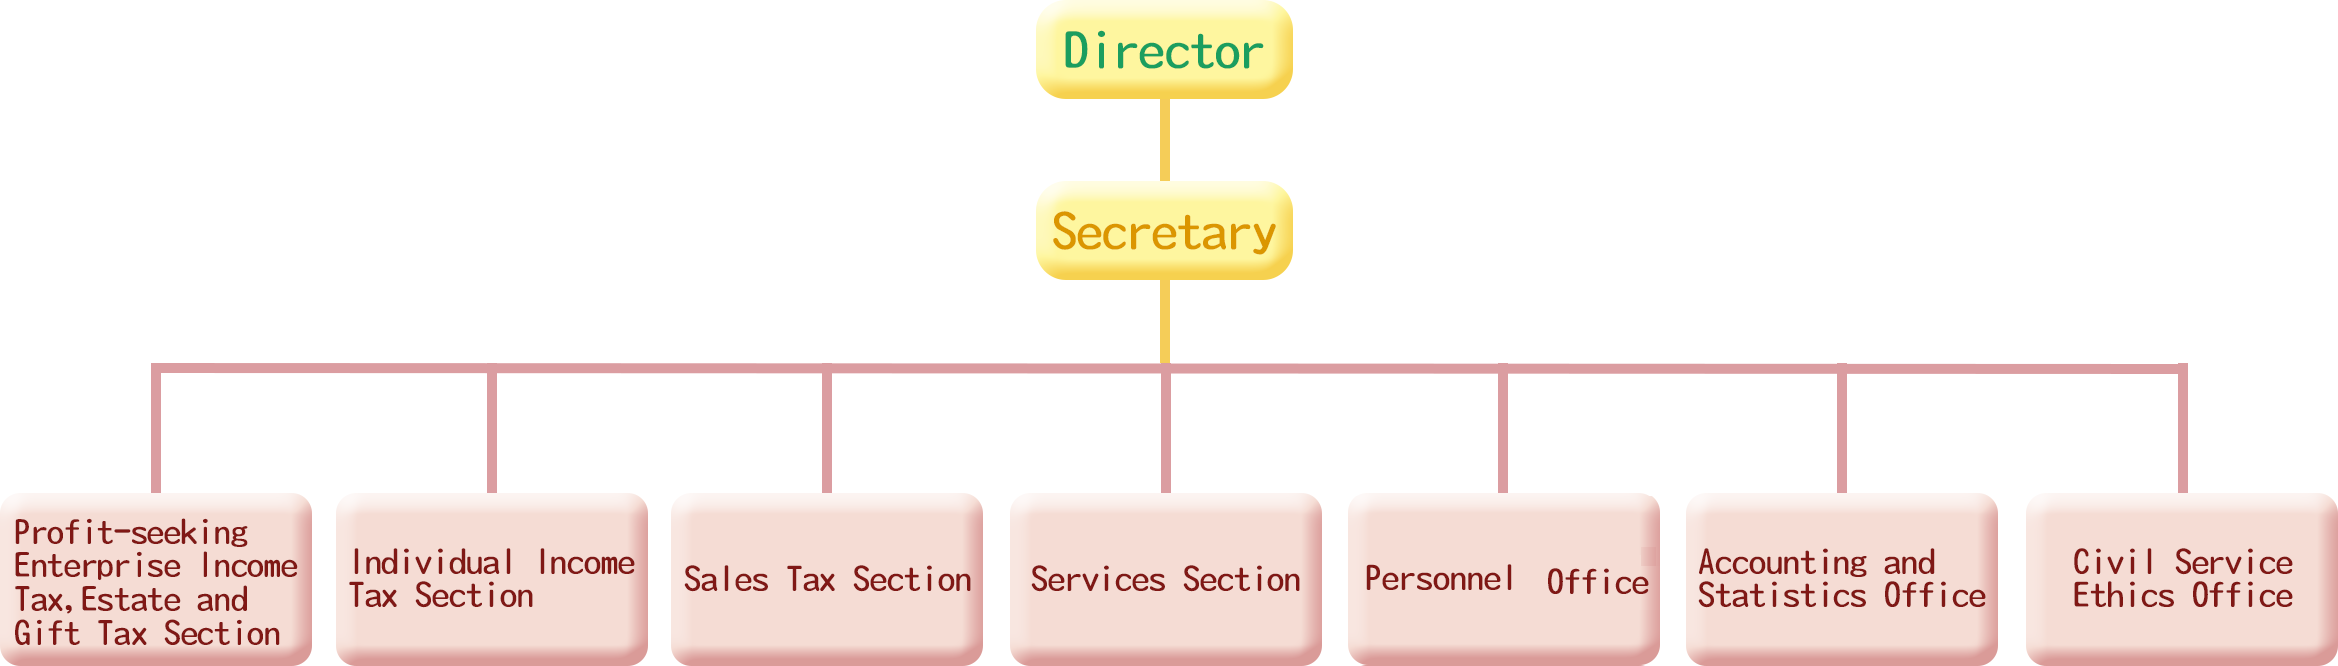 Organizational structure of Mailio Branch.png 